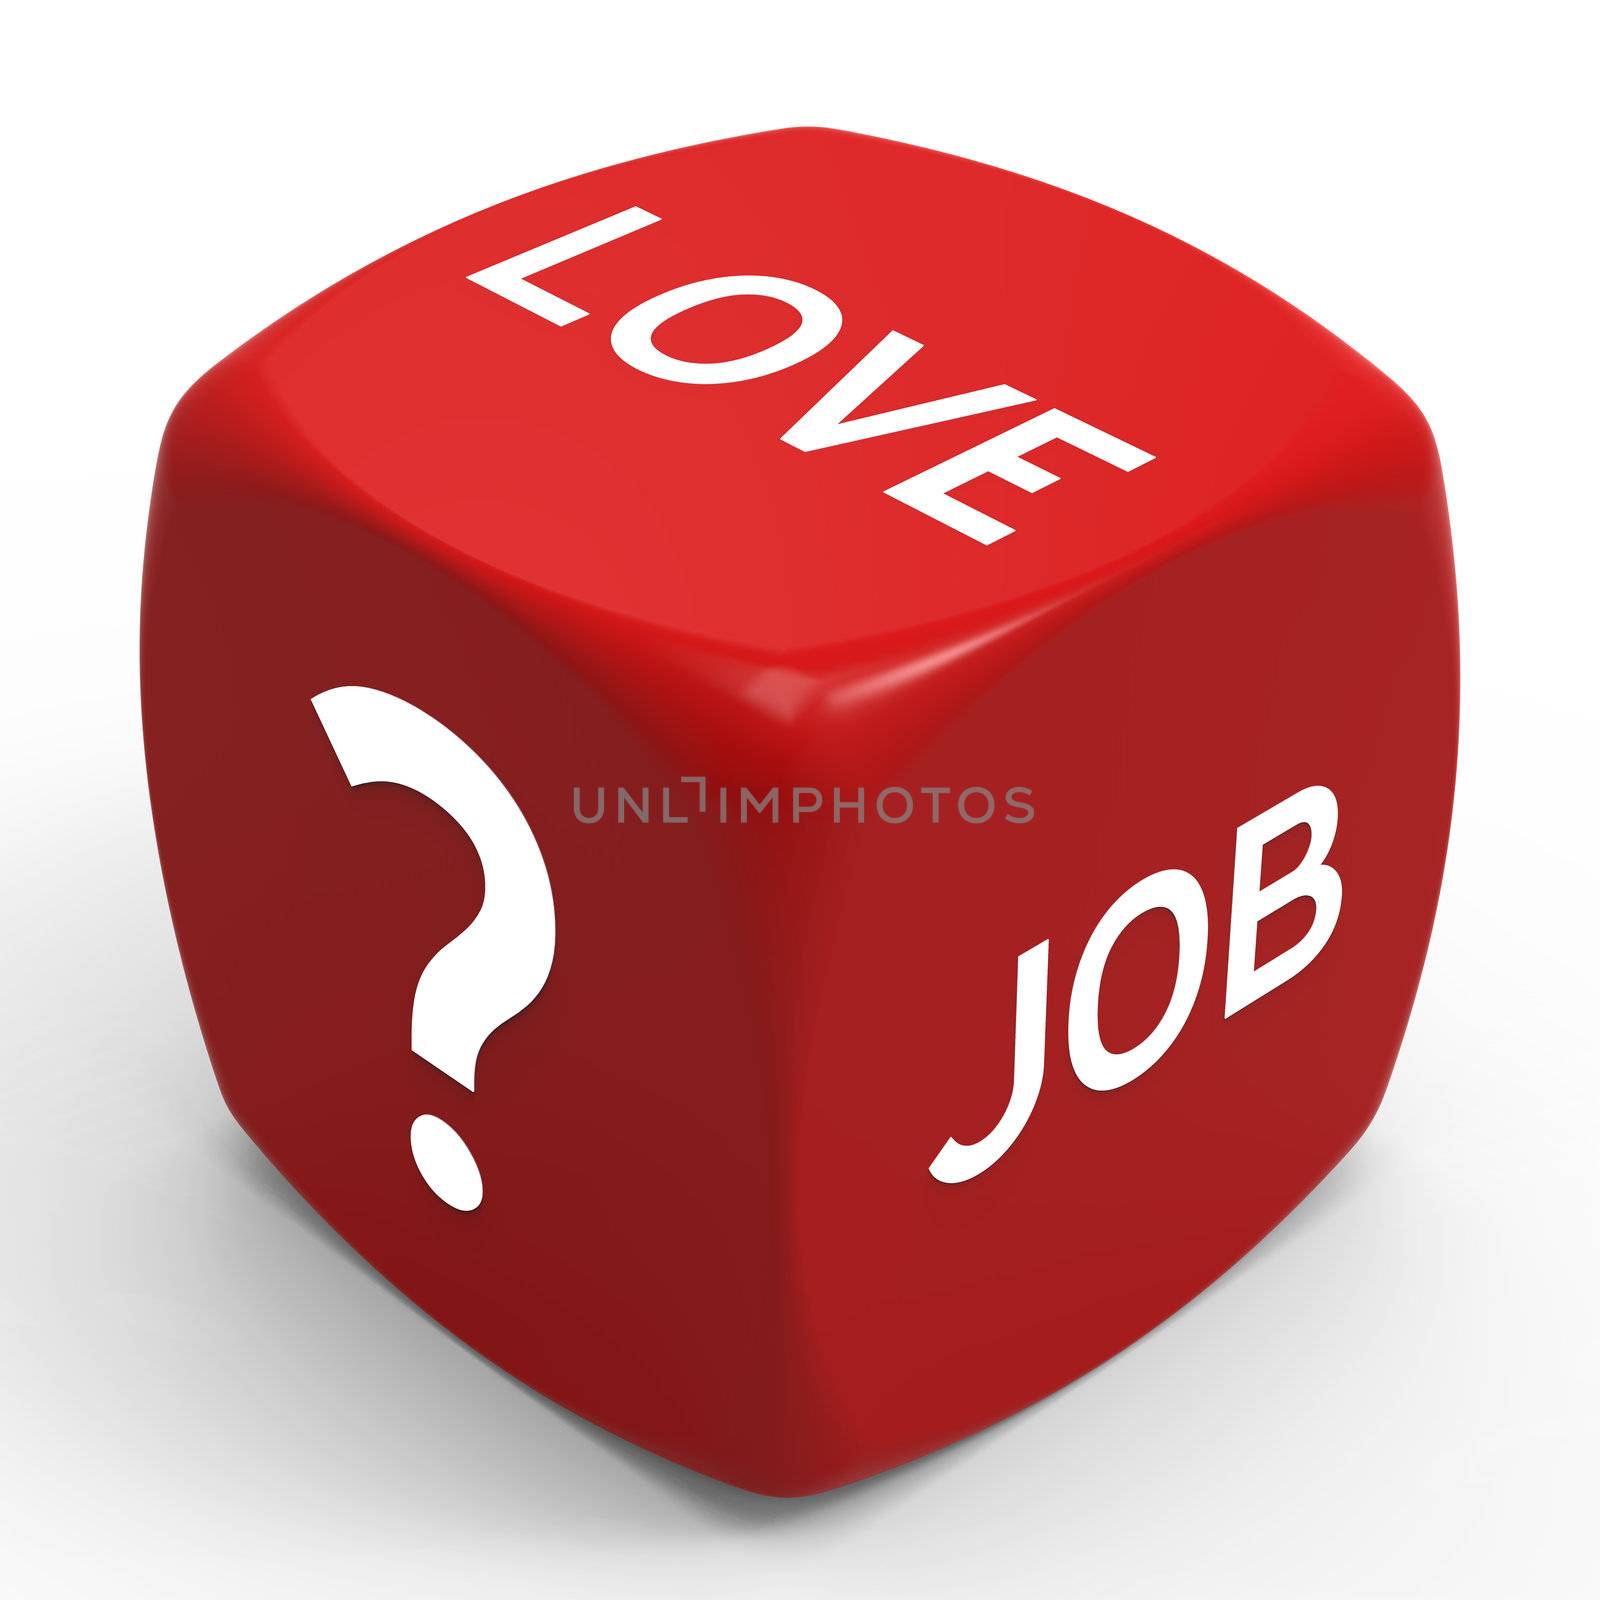 Love or Career - How to Make the Right Choice.